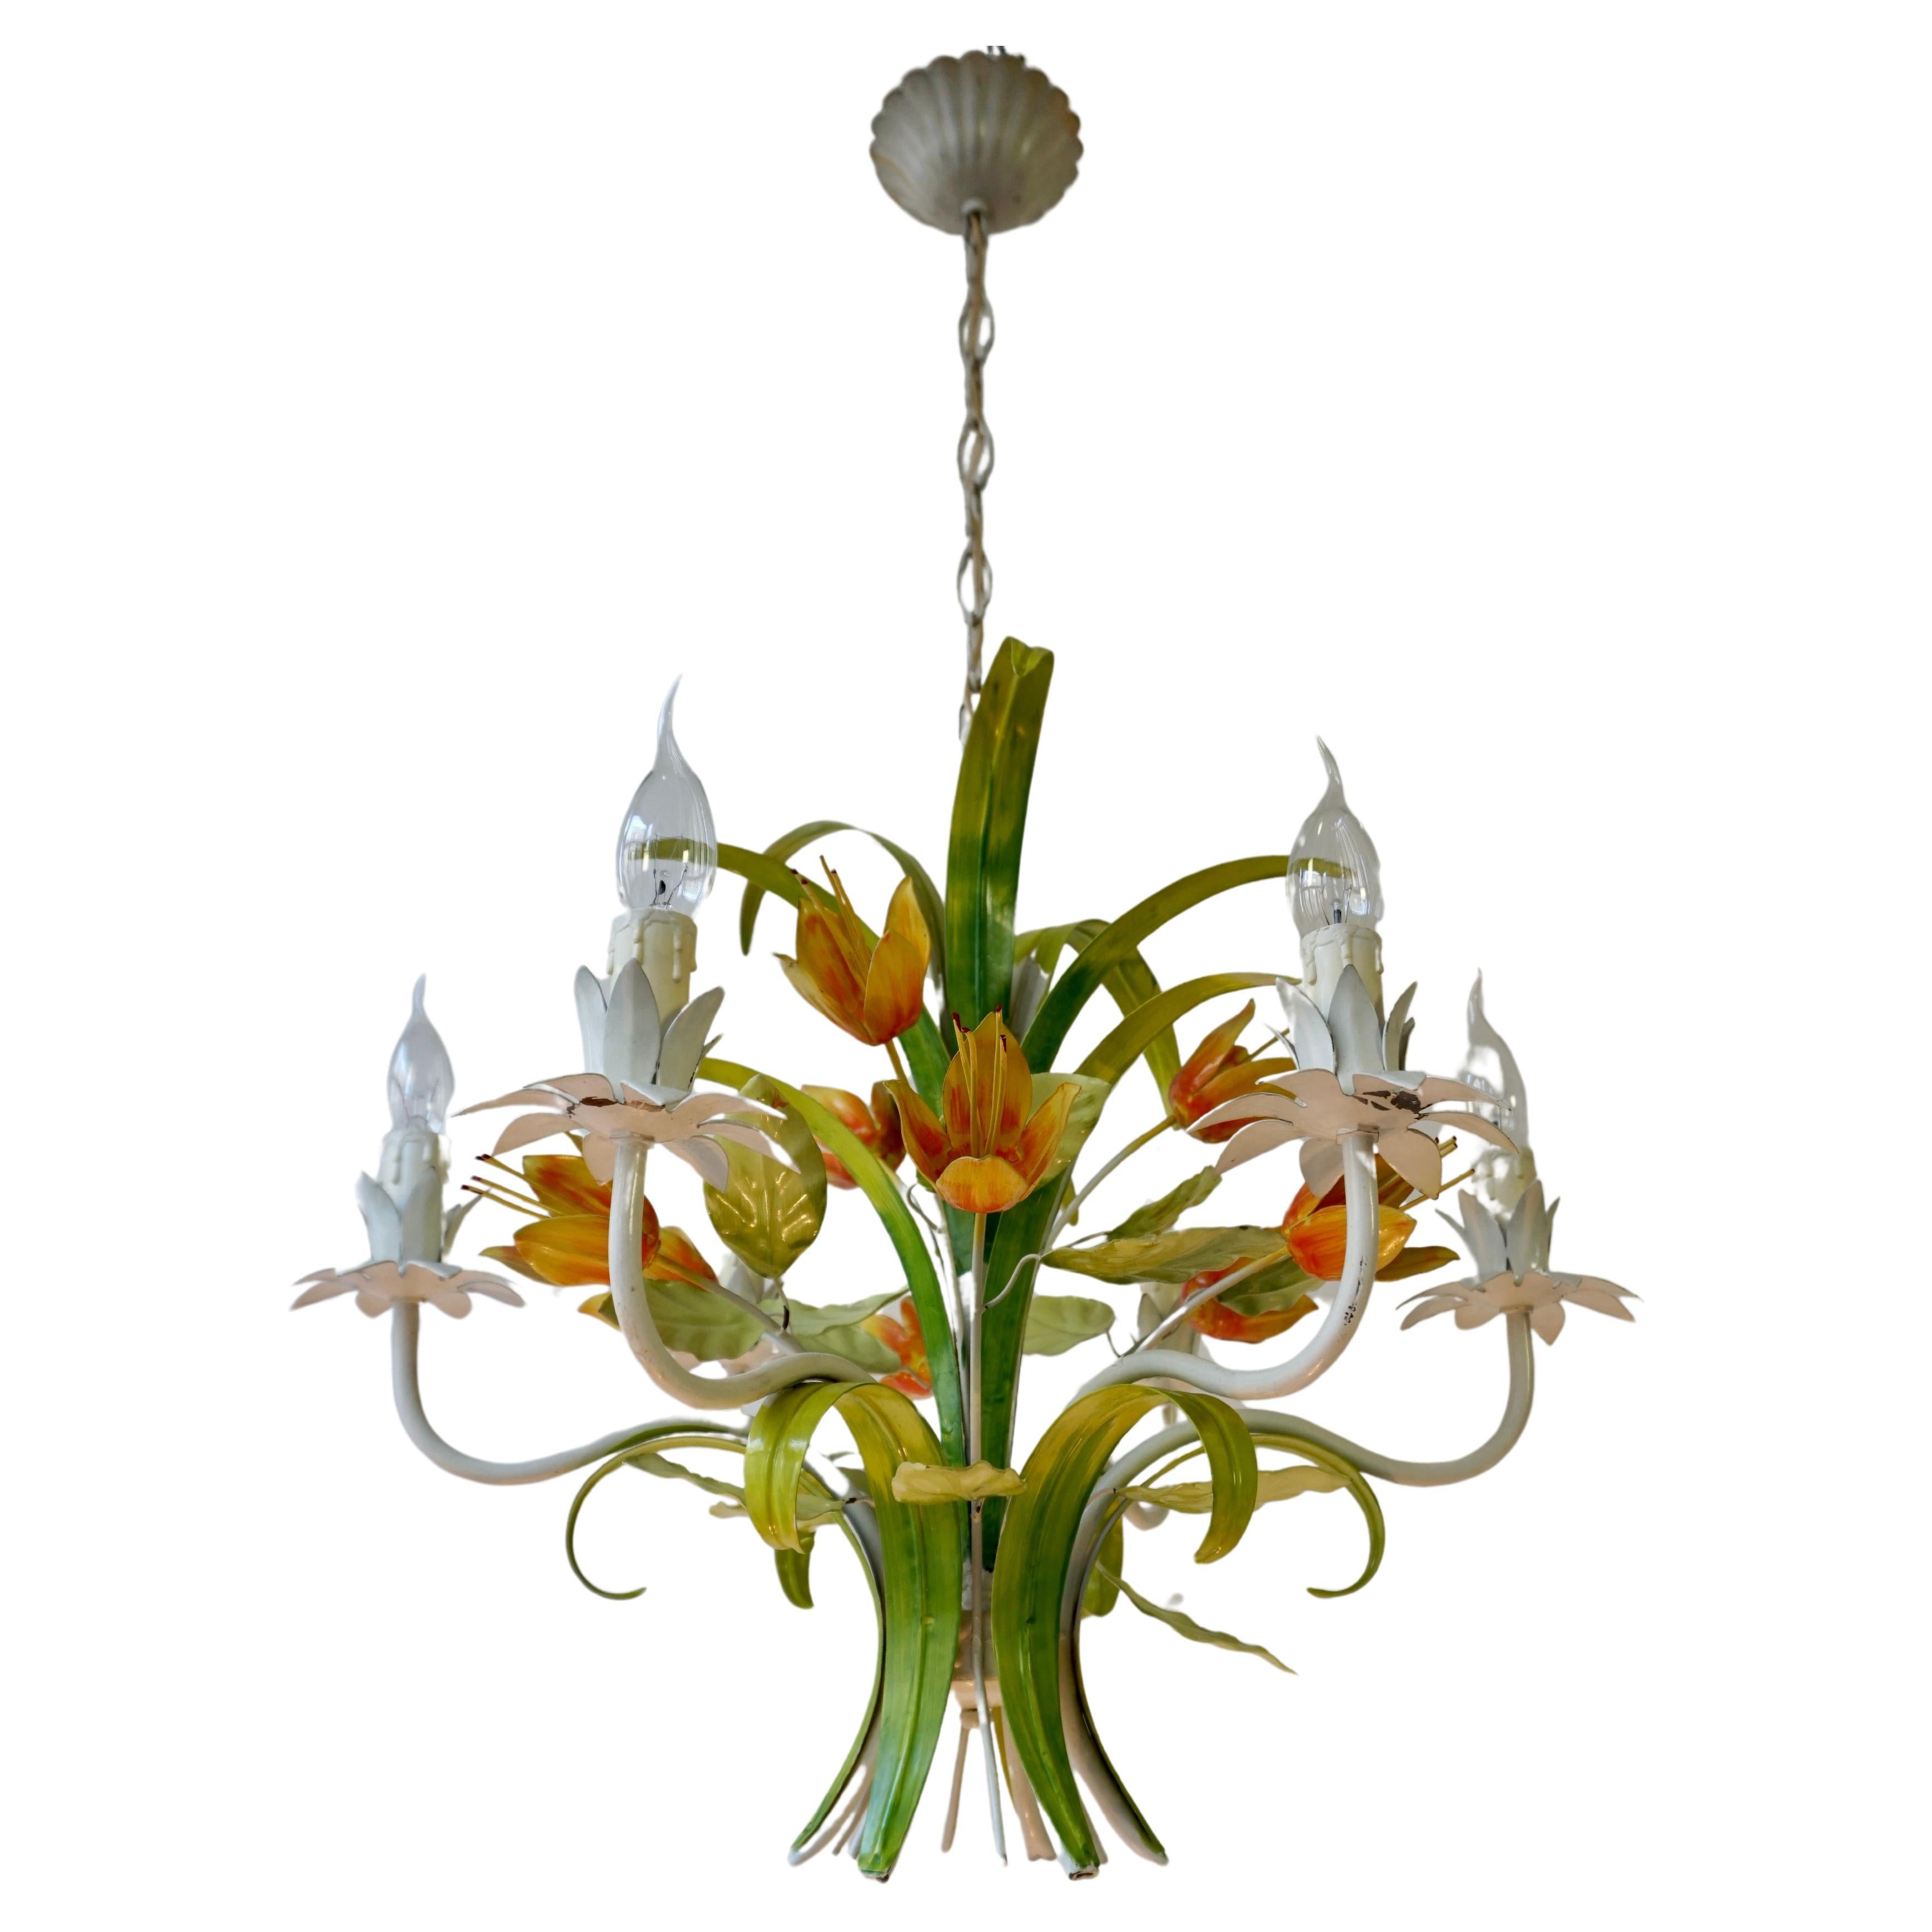 1960s Bright Boho Chic Italian Tole Painted Metal Chandelier With Floral Decor For Sale